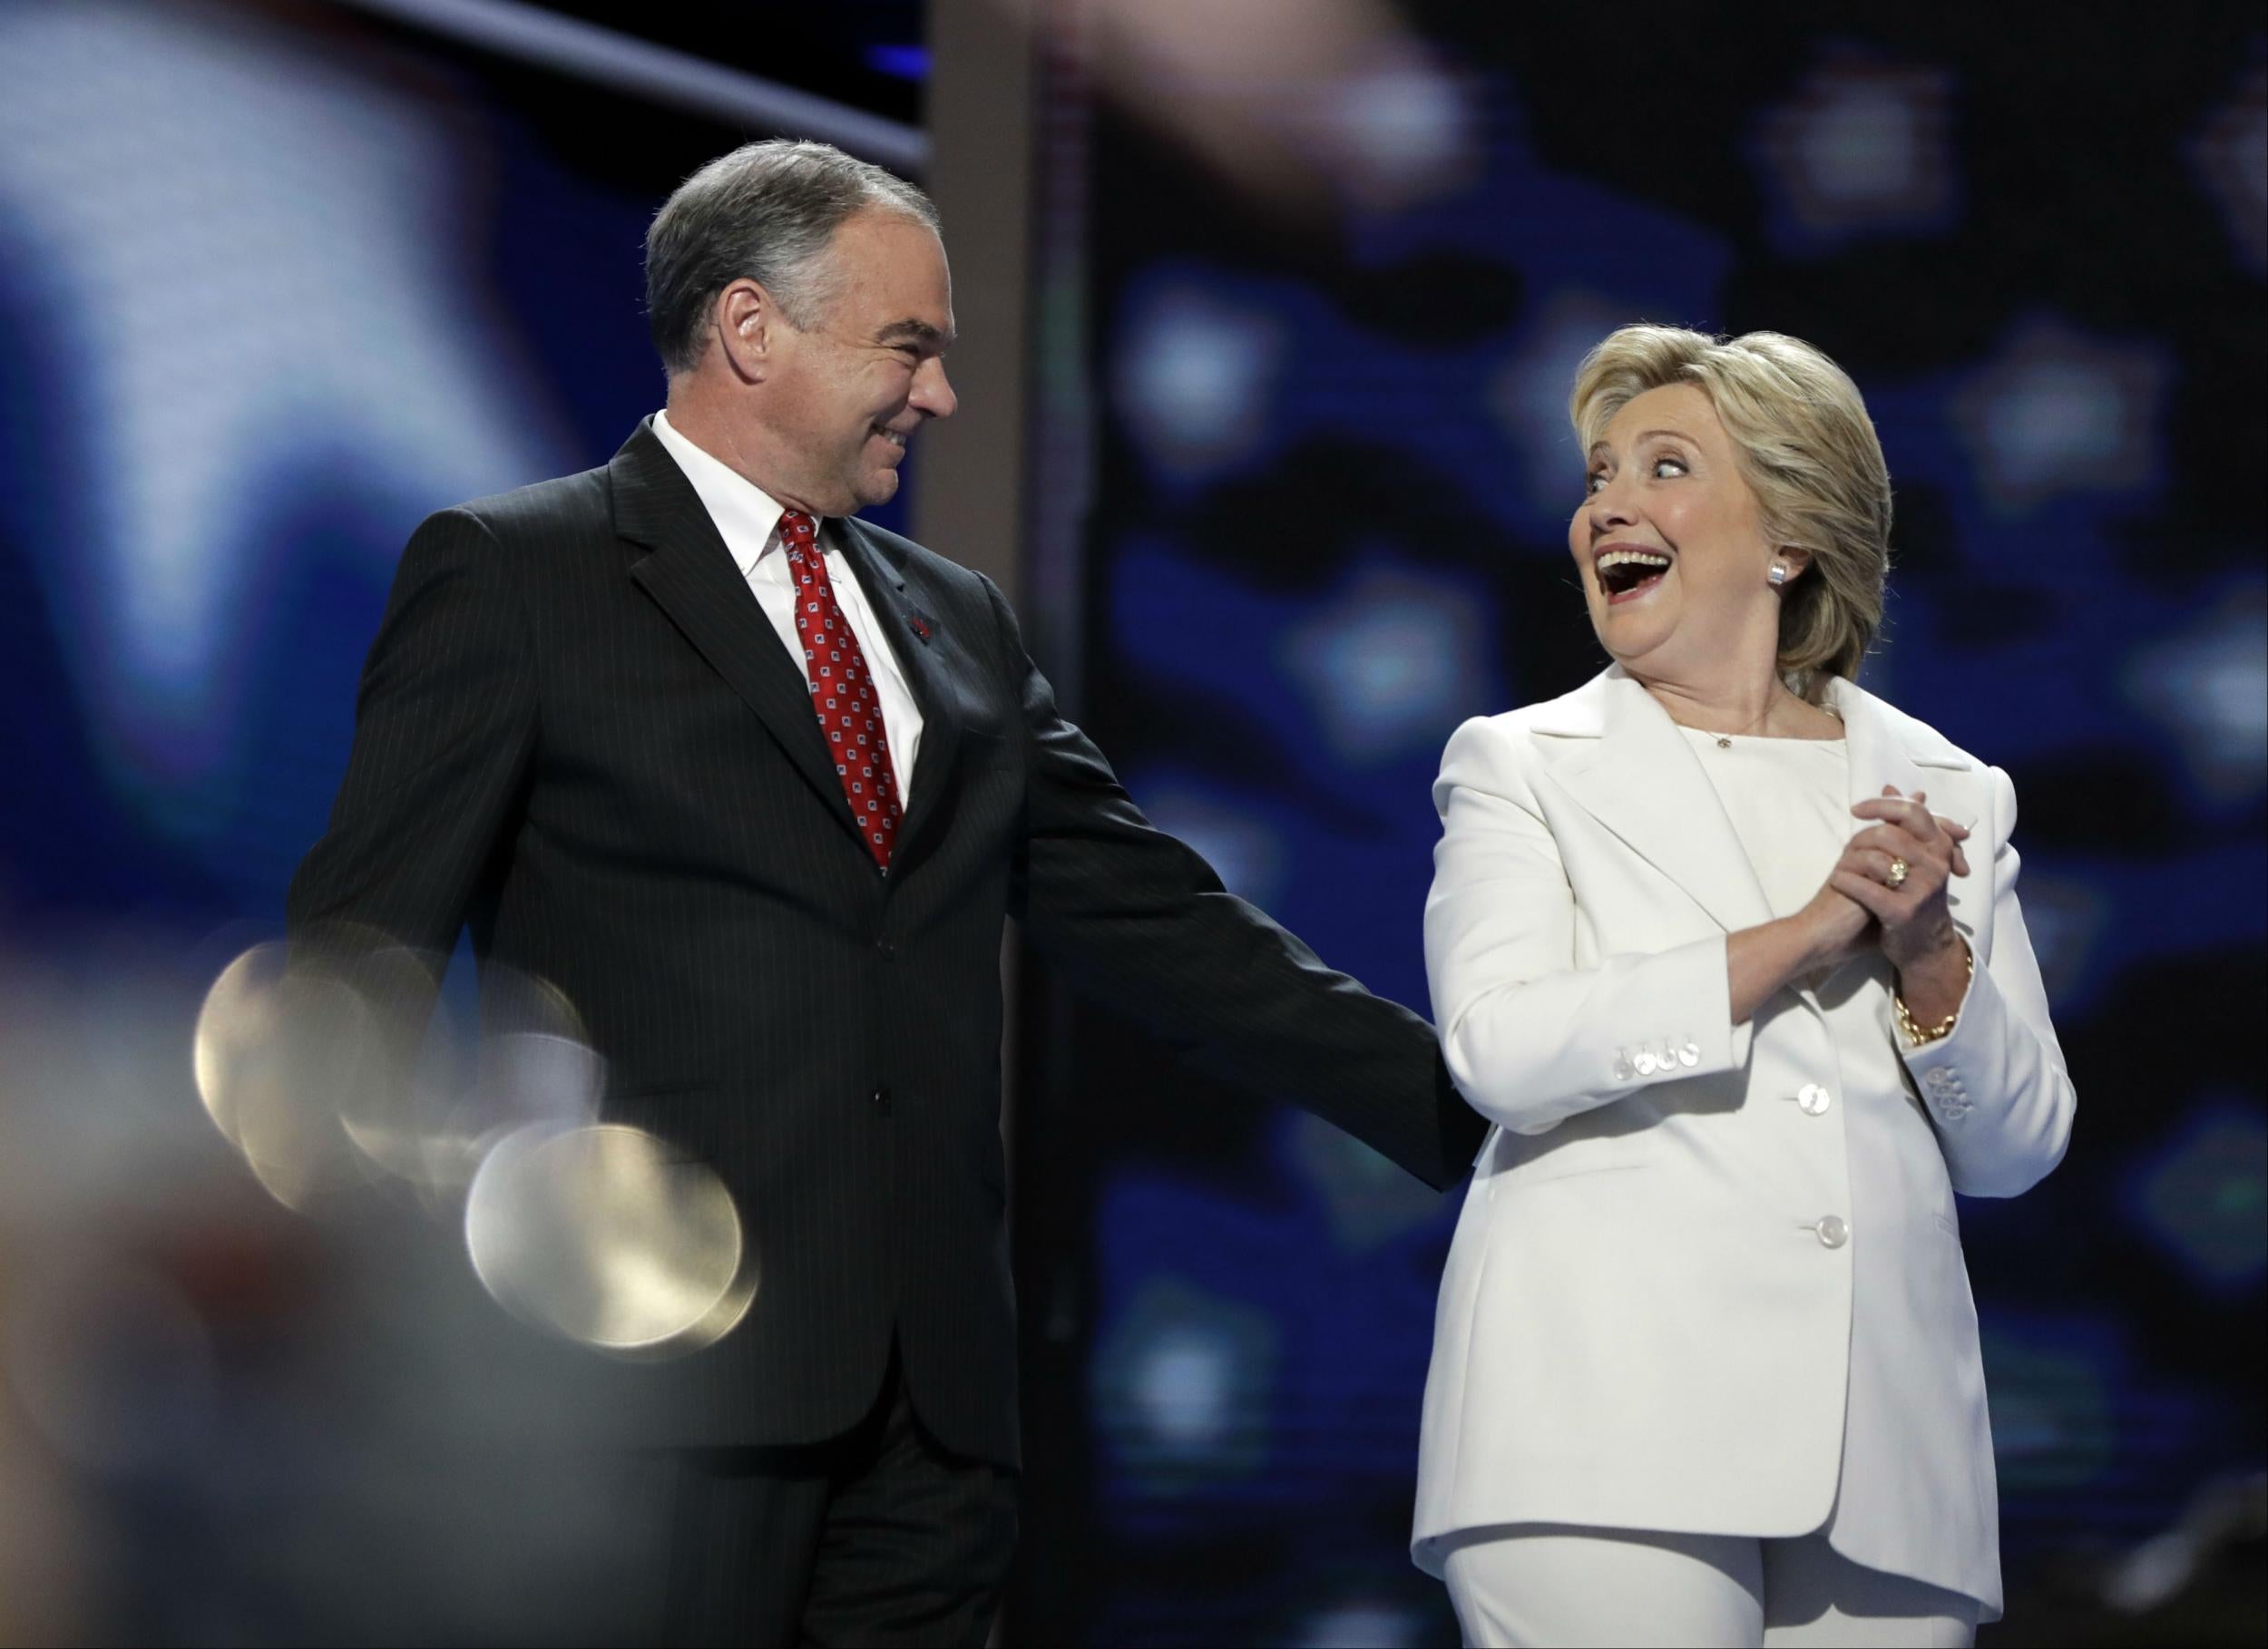 Clinton and Kaine's book has an Amazon score of 2.5 stars